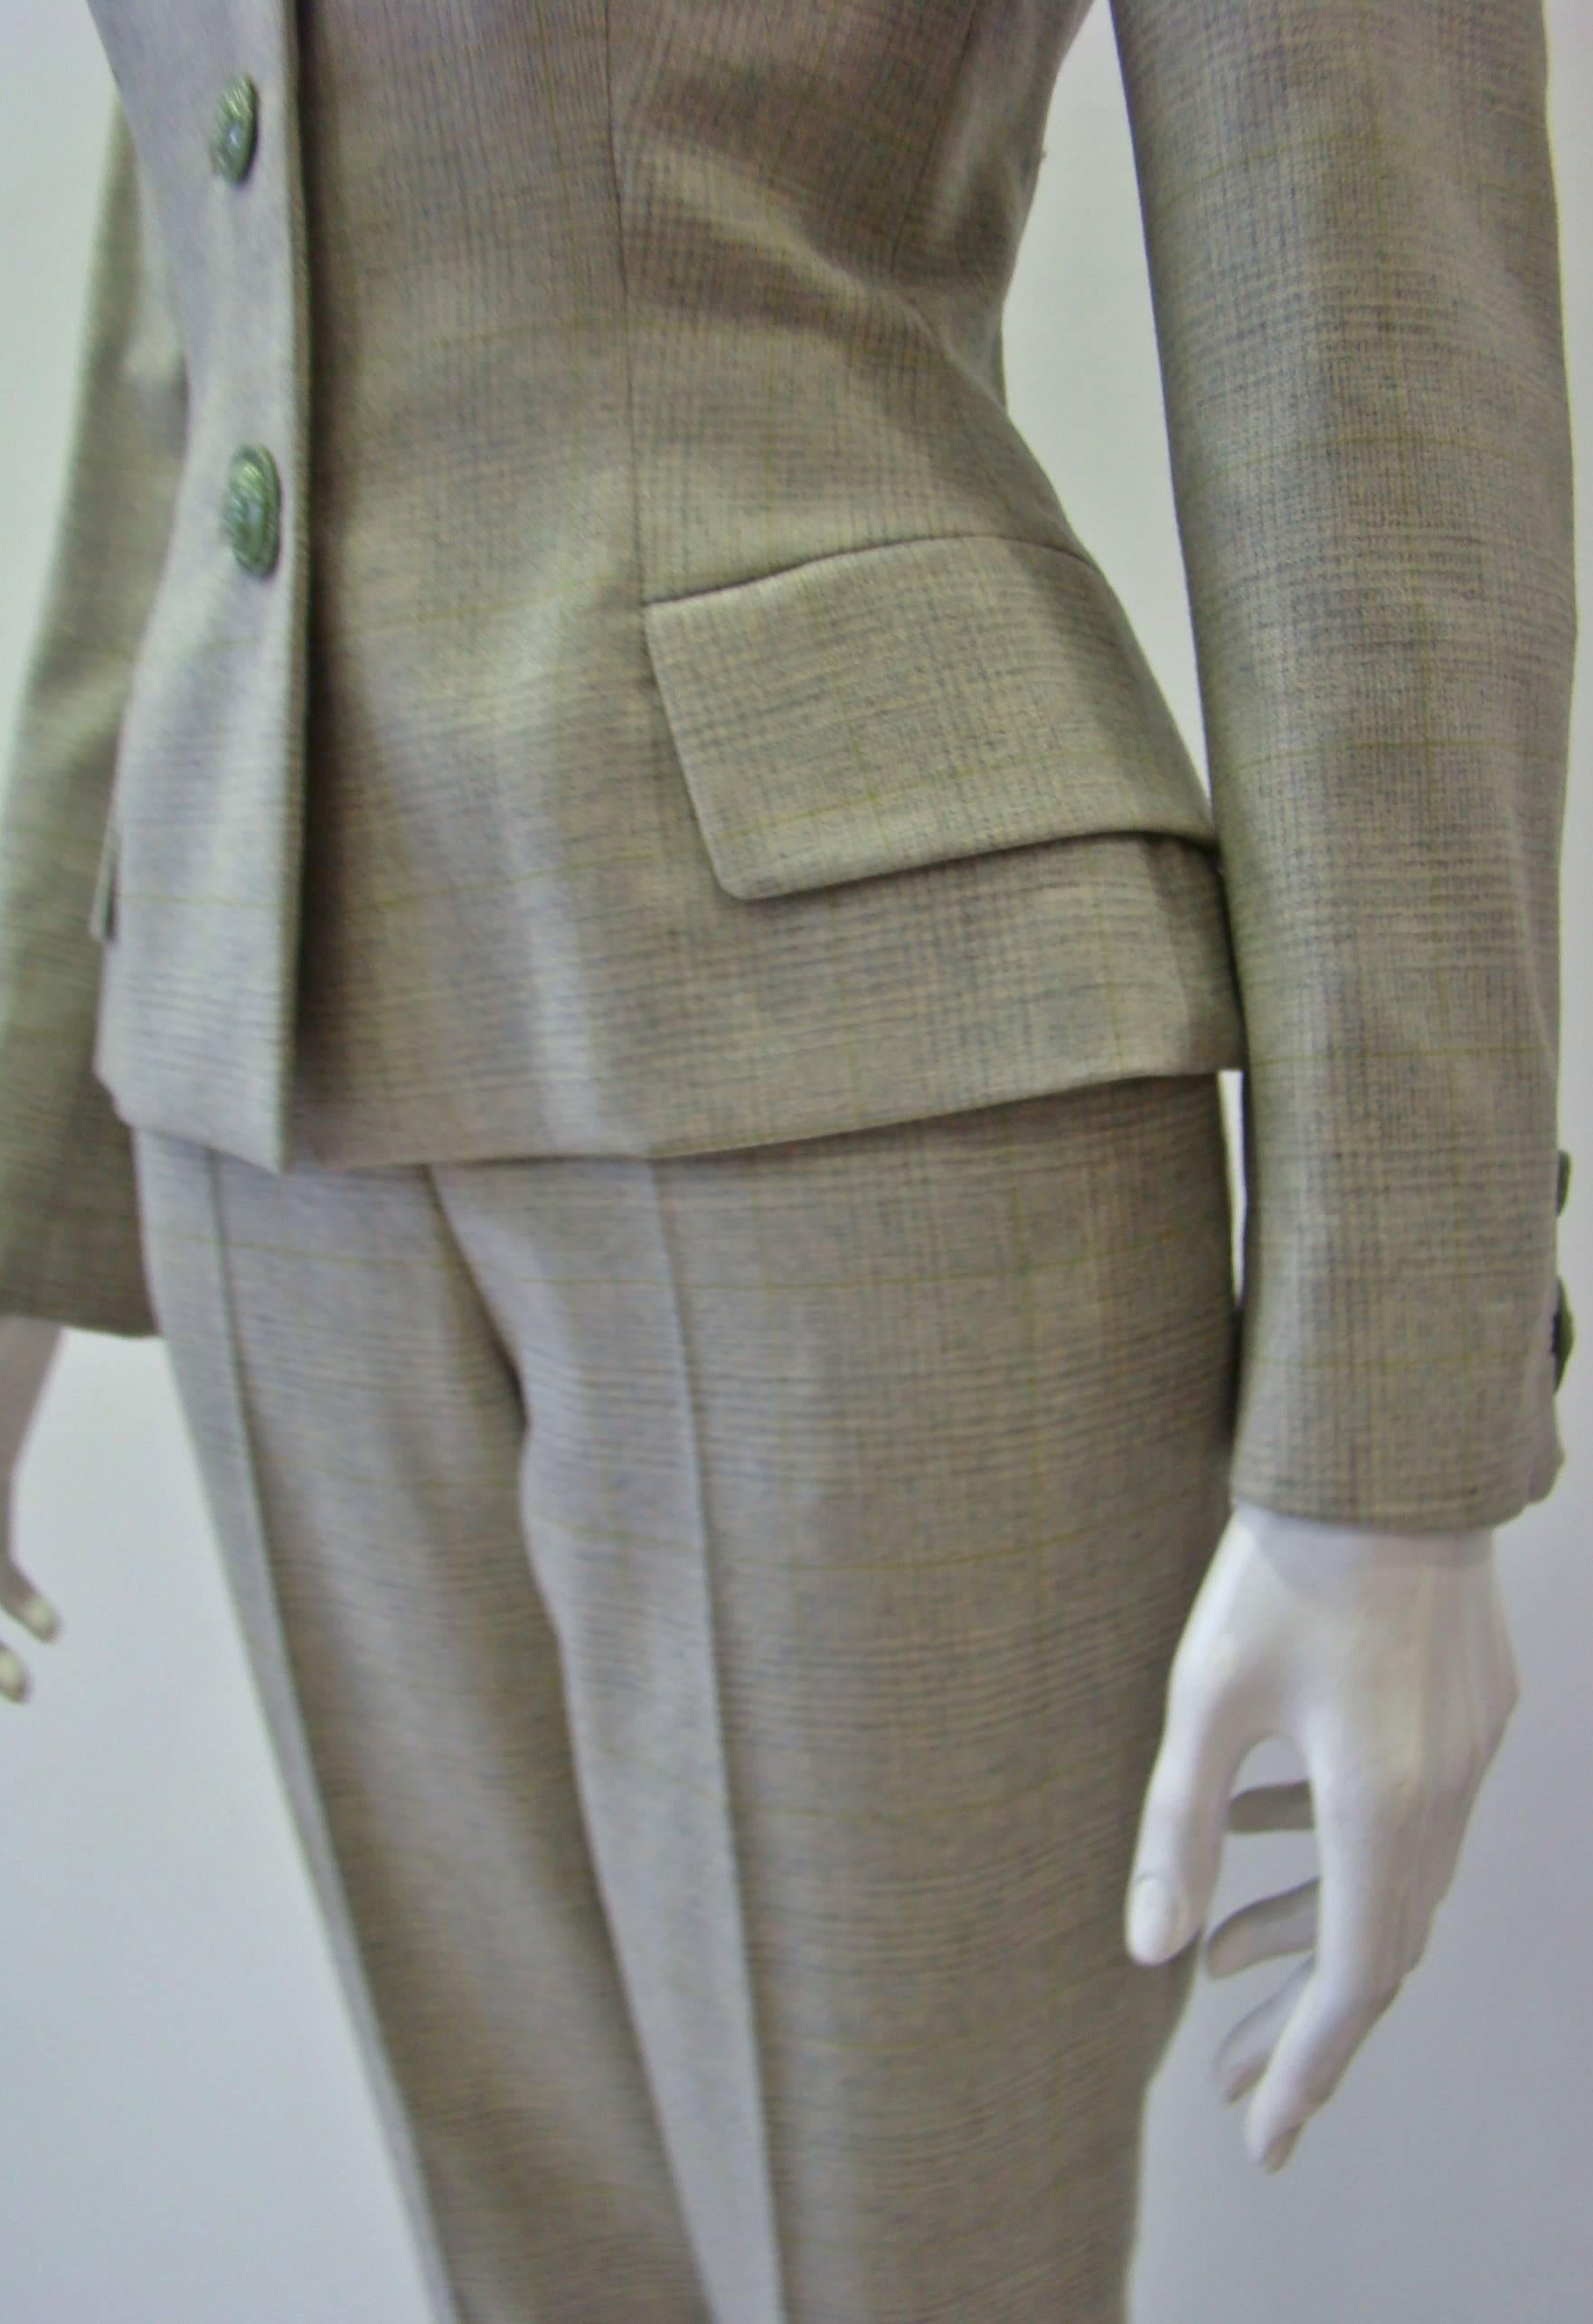 Gianni Versace Mint Green Prens De Gal Wool Pants Suit In New Condition For Sale In Athens, Agia Paraskevi